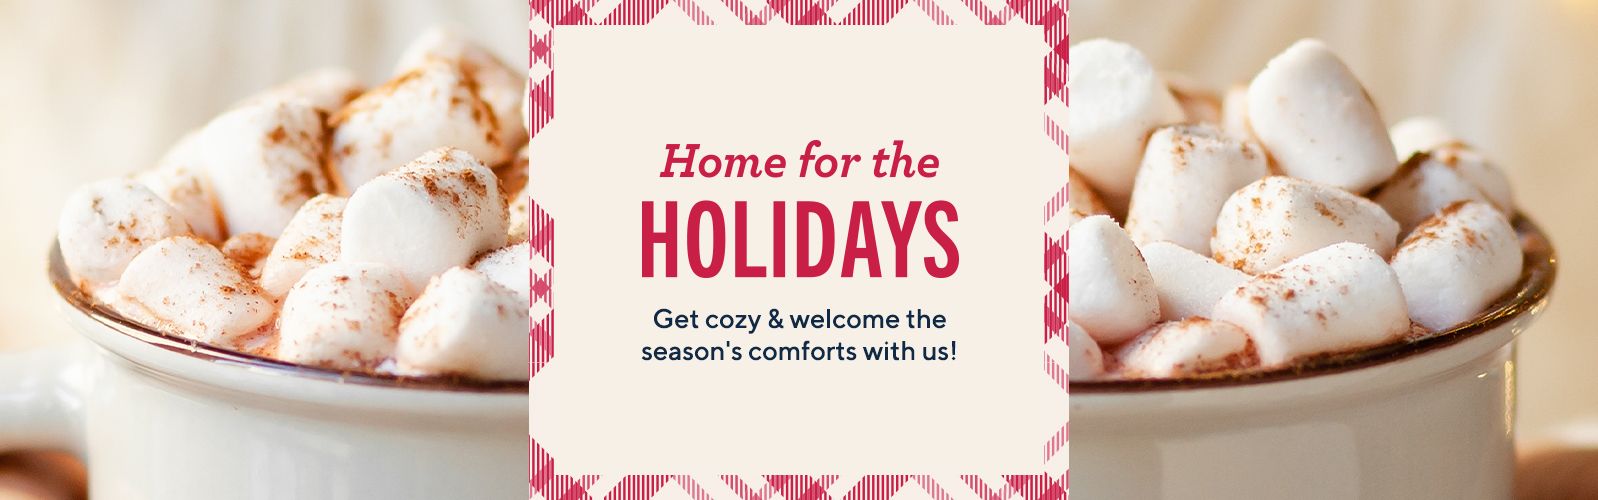 Home for the Holidays.  Get cozy & welcome the season's comforts with us!